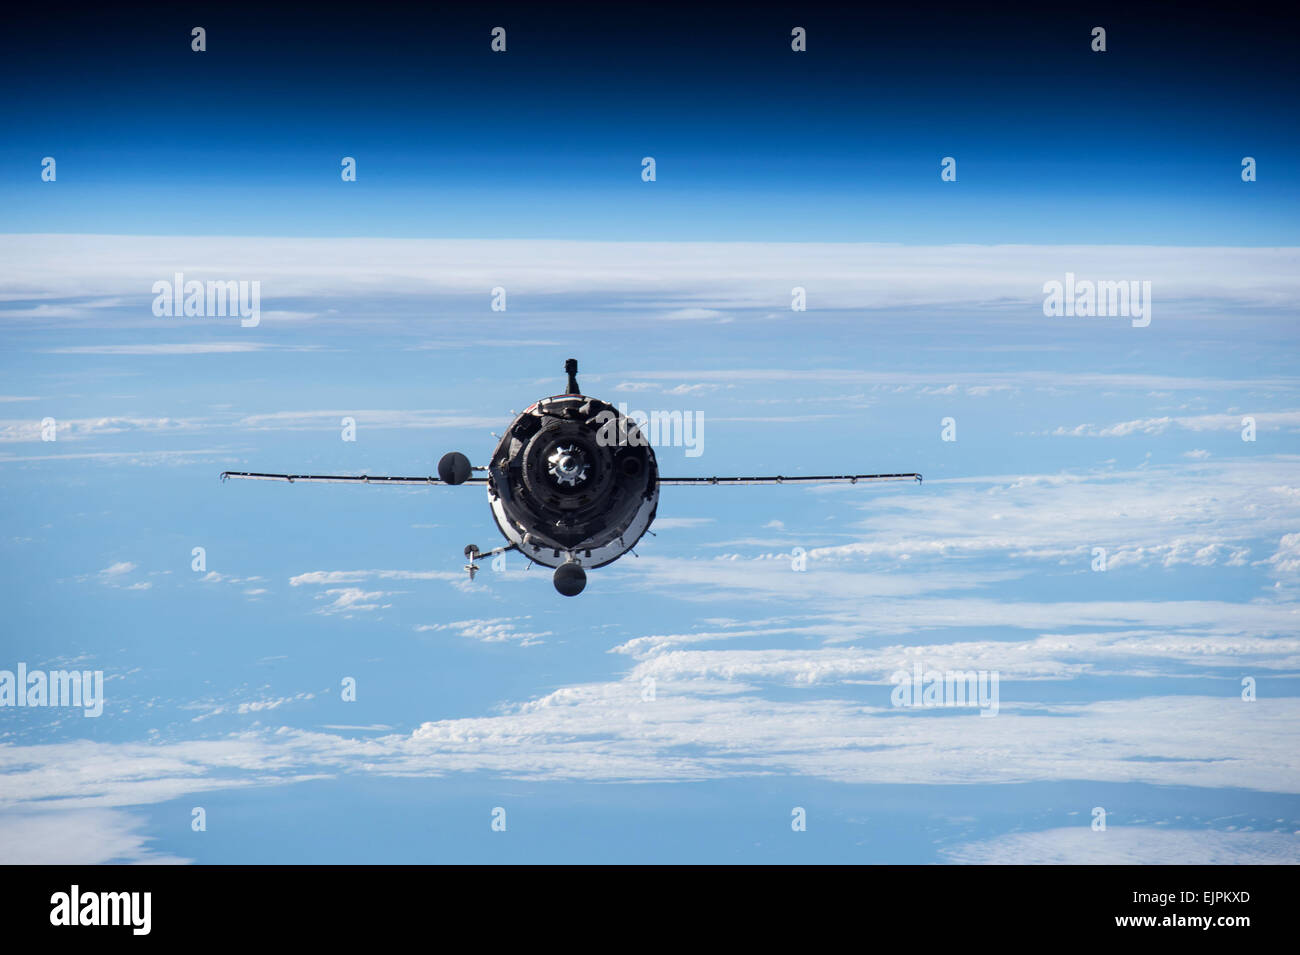 The Russian Soyuz TMA16M spacecraft approaches the International Space Station for docking March 28, 2015 in Earth Orbit. The Soyuz is carrying NASA Astronaut Scott Kelly and Russian cosmonauts Gennady Padalka and Mikhail Kornienko. Stock Photo